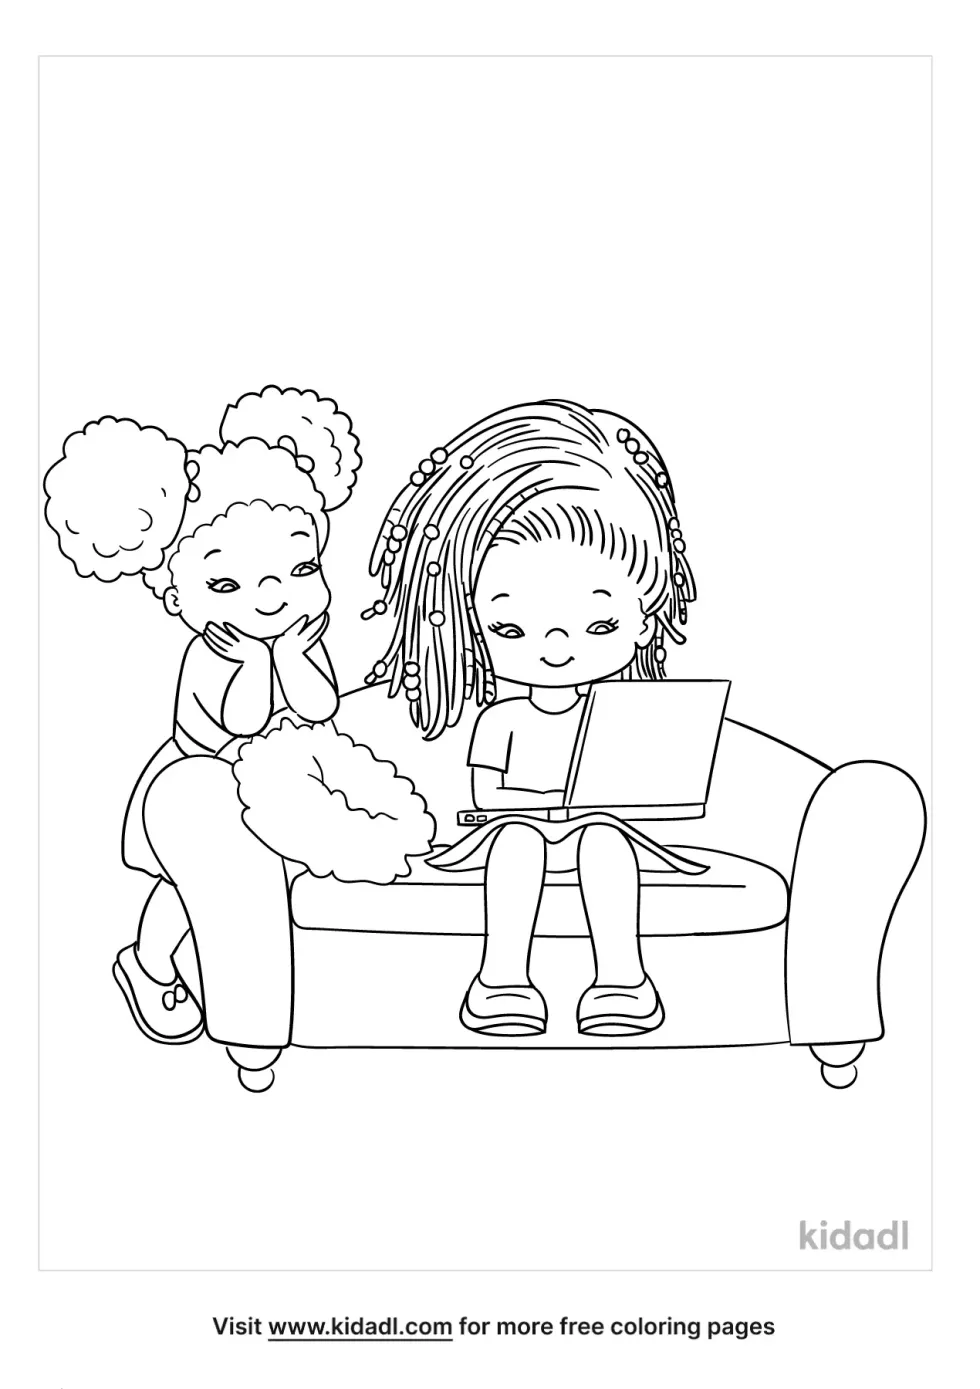 Black Girls Coloring Page